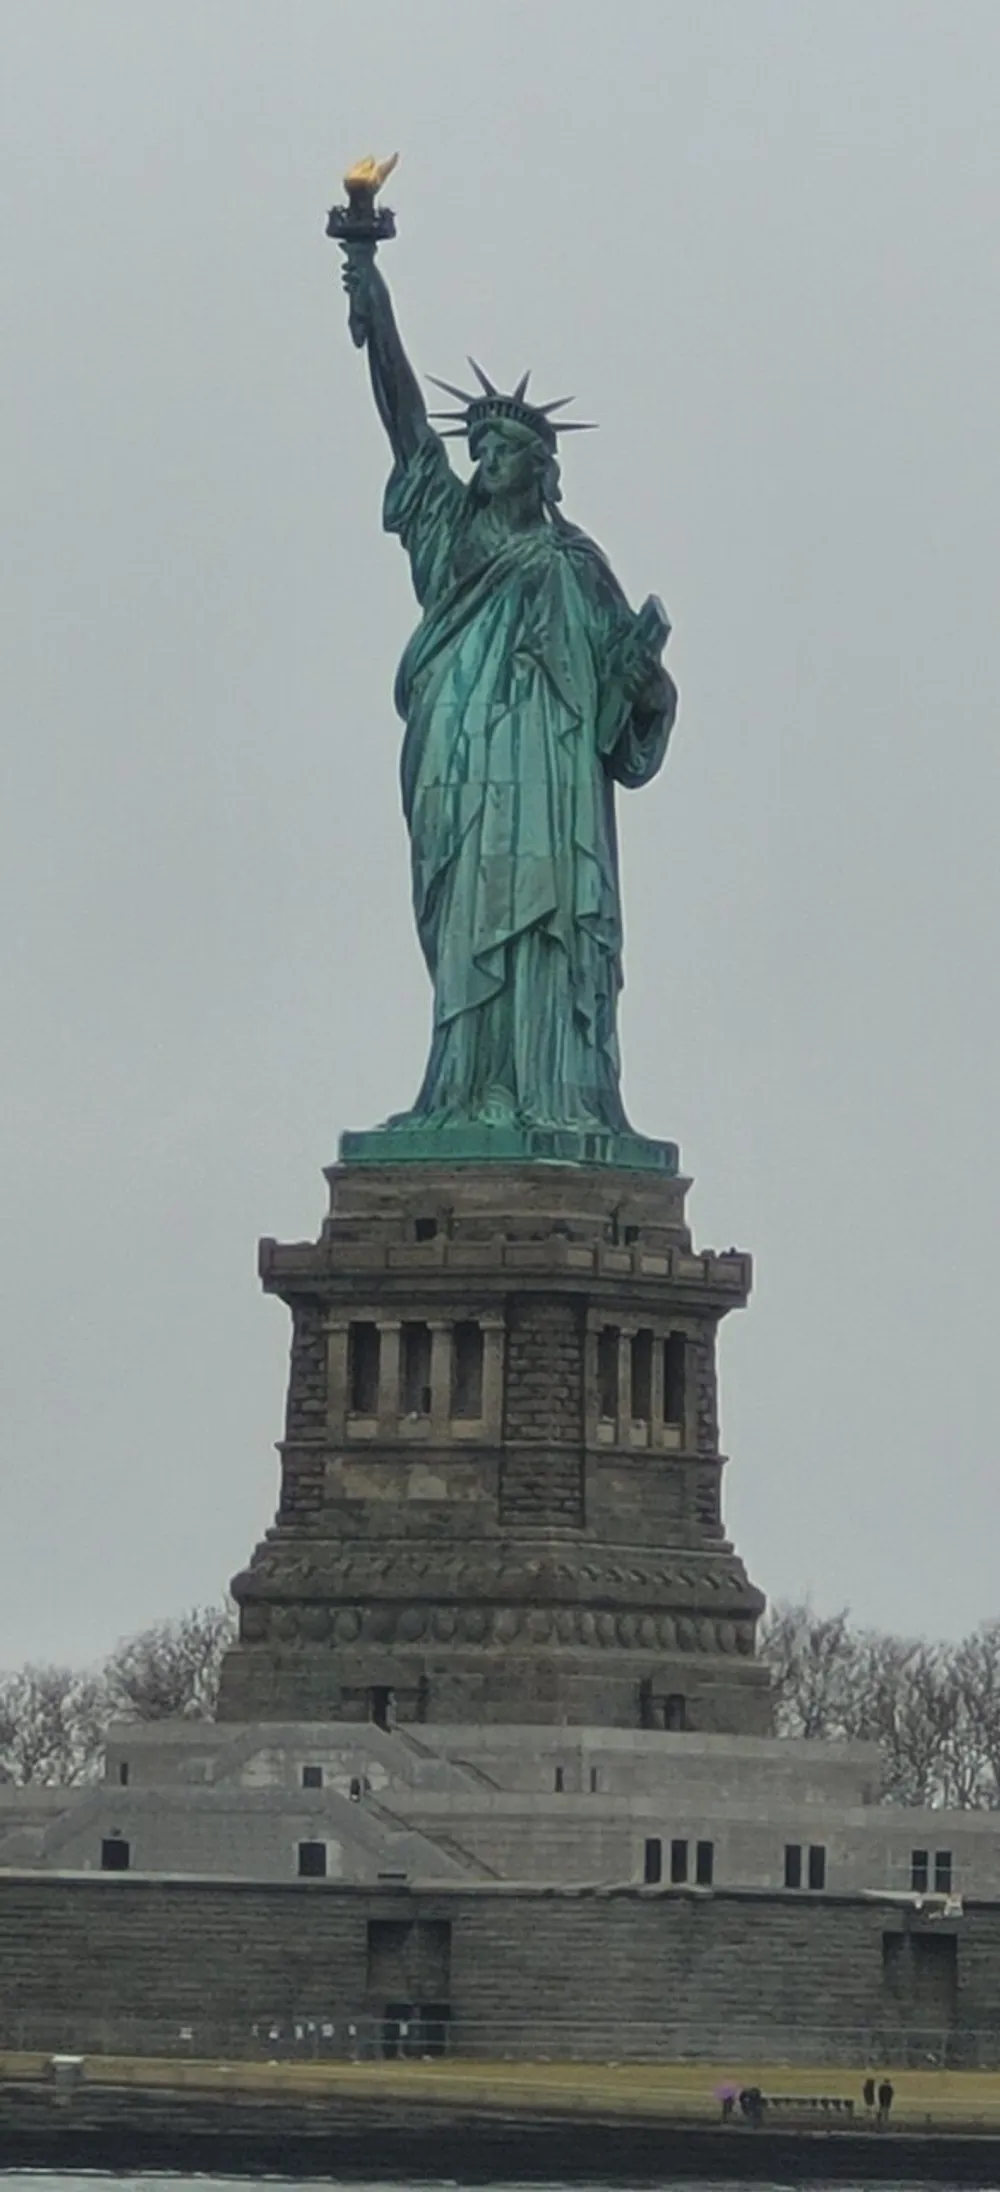 This image shows the Statue of Liberty standing tall against a cloudy sky